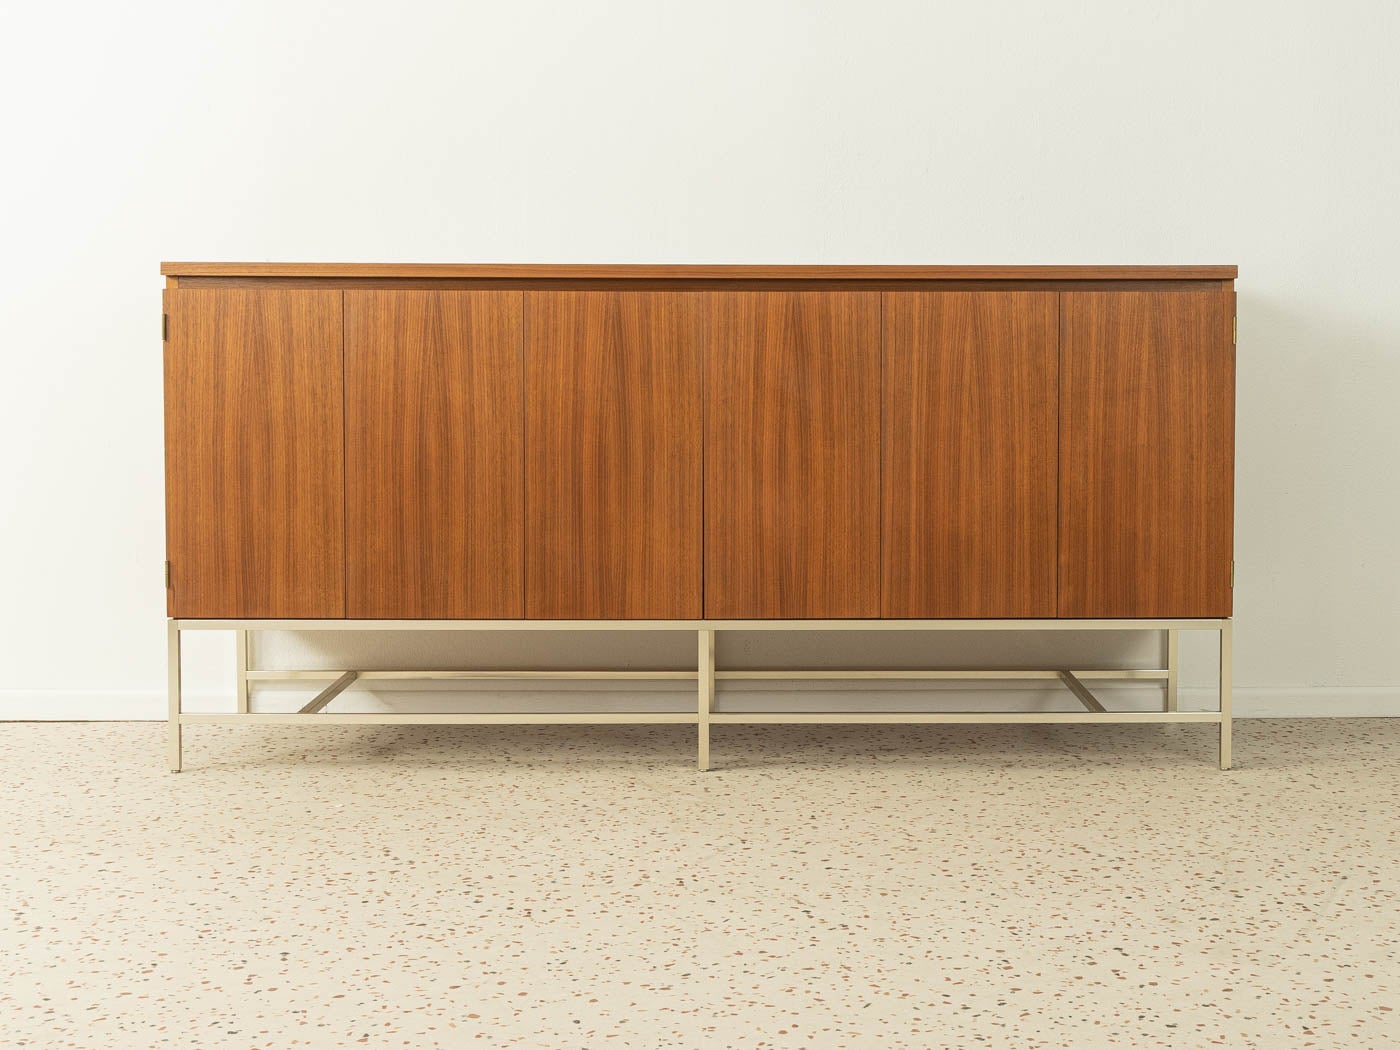 Very rare sideboard from the 1950s by Paul McCobb for WK Möbel. Corpus in walnut veneer with two shelves, two folding doors and squared steel base frame.

Quality features:
- Very high-quality materials
- Good workmanship
- Made in Germany.